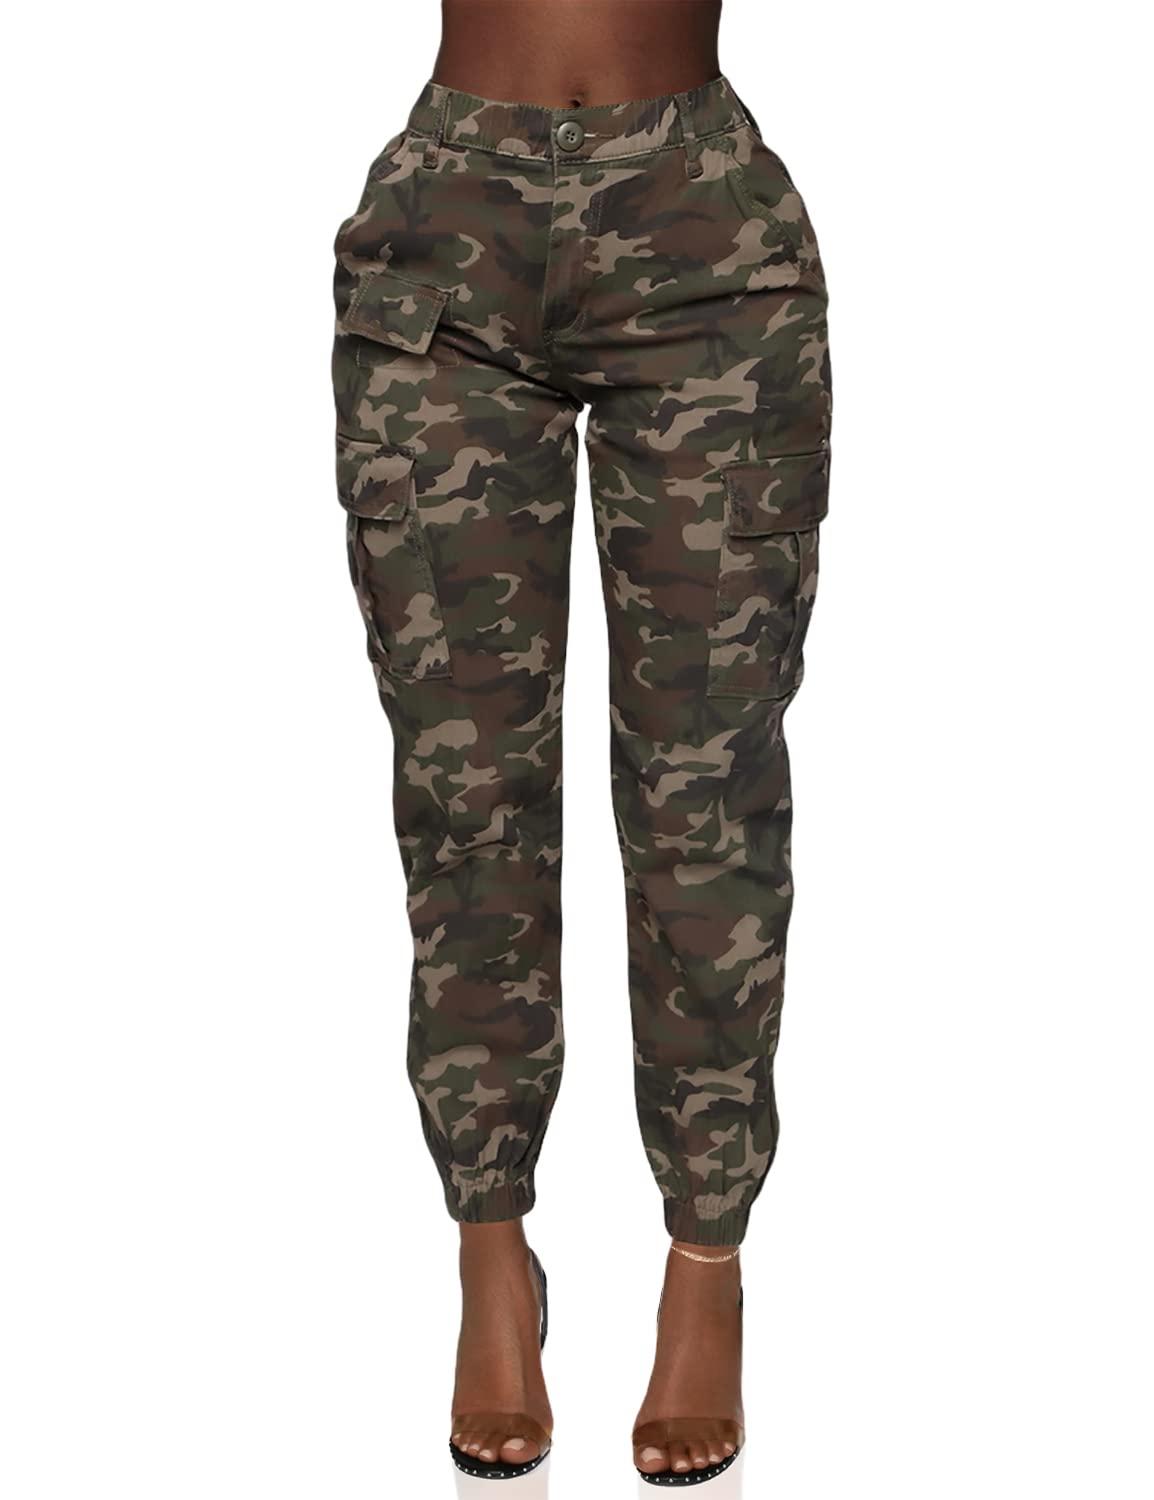 Double Denim Women's High Waist Jogger Pants - Casual Cargo Elastic  Waistband Sweatpants Tapered Fatigue with 6 Pockets Camouflage X-Large